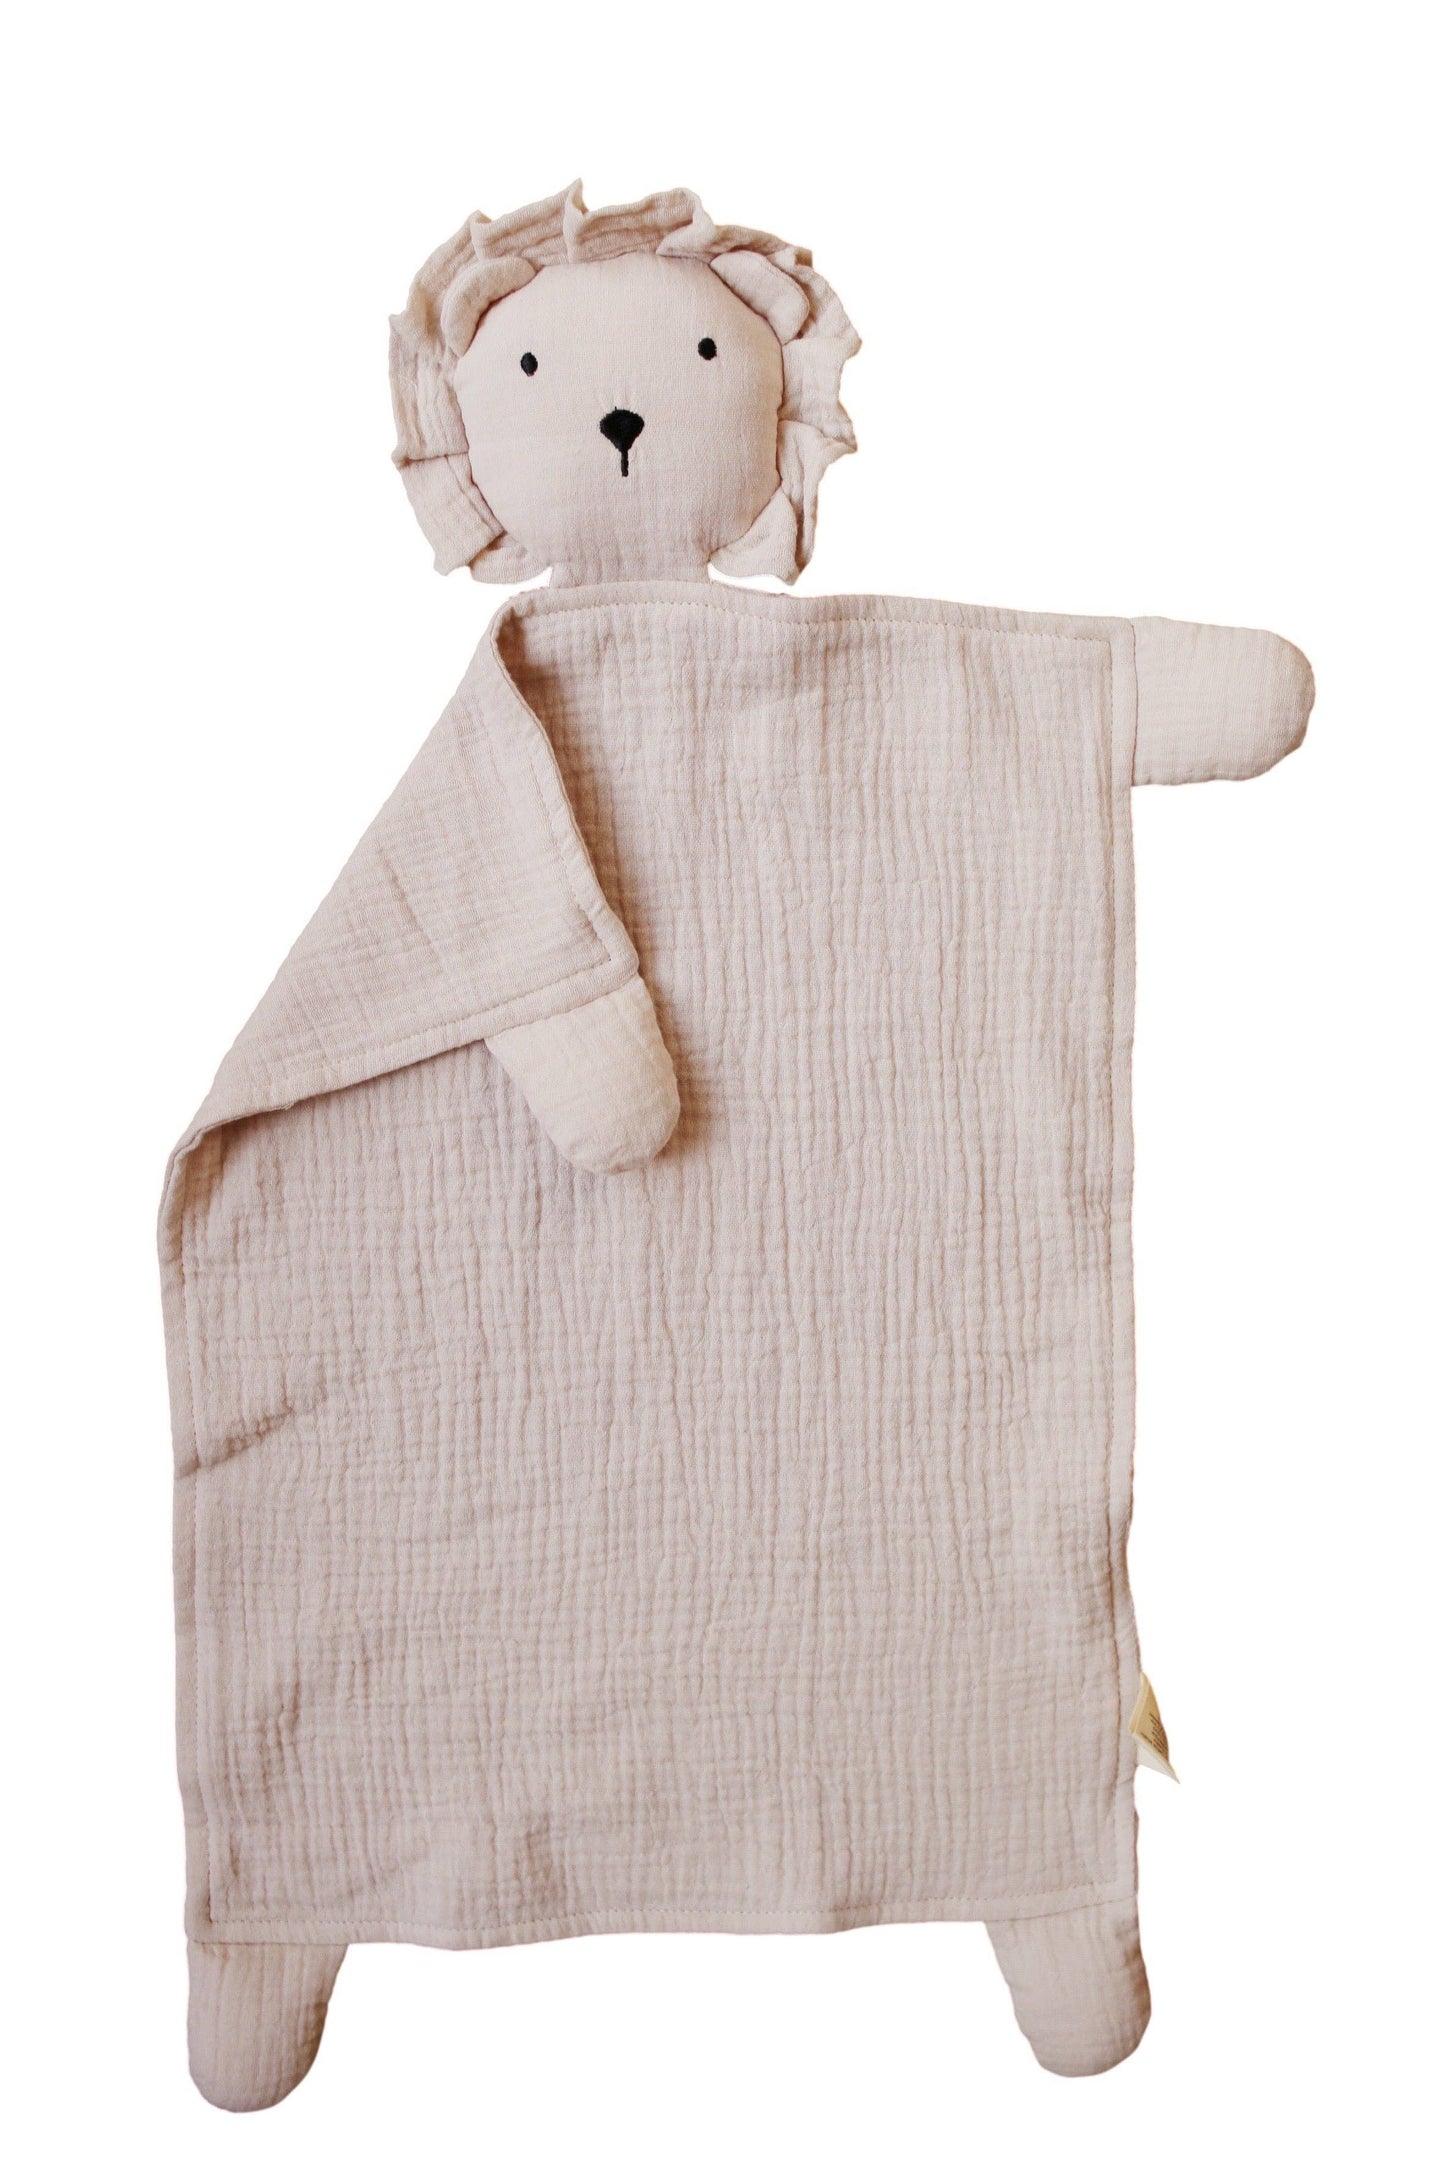 Marlowe & Co - Lion Lovey Blanket in Assorted Colors